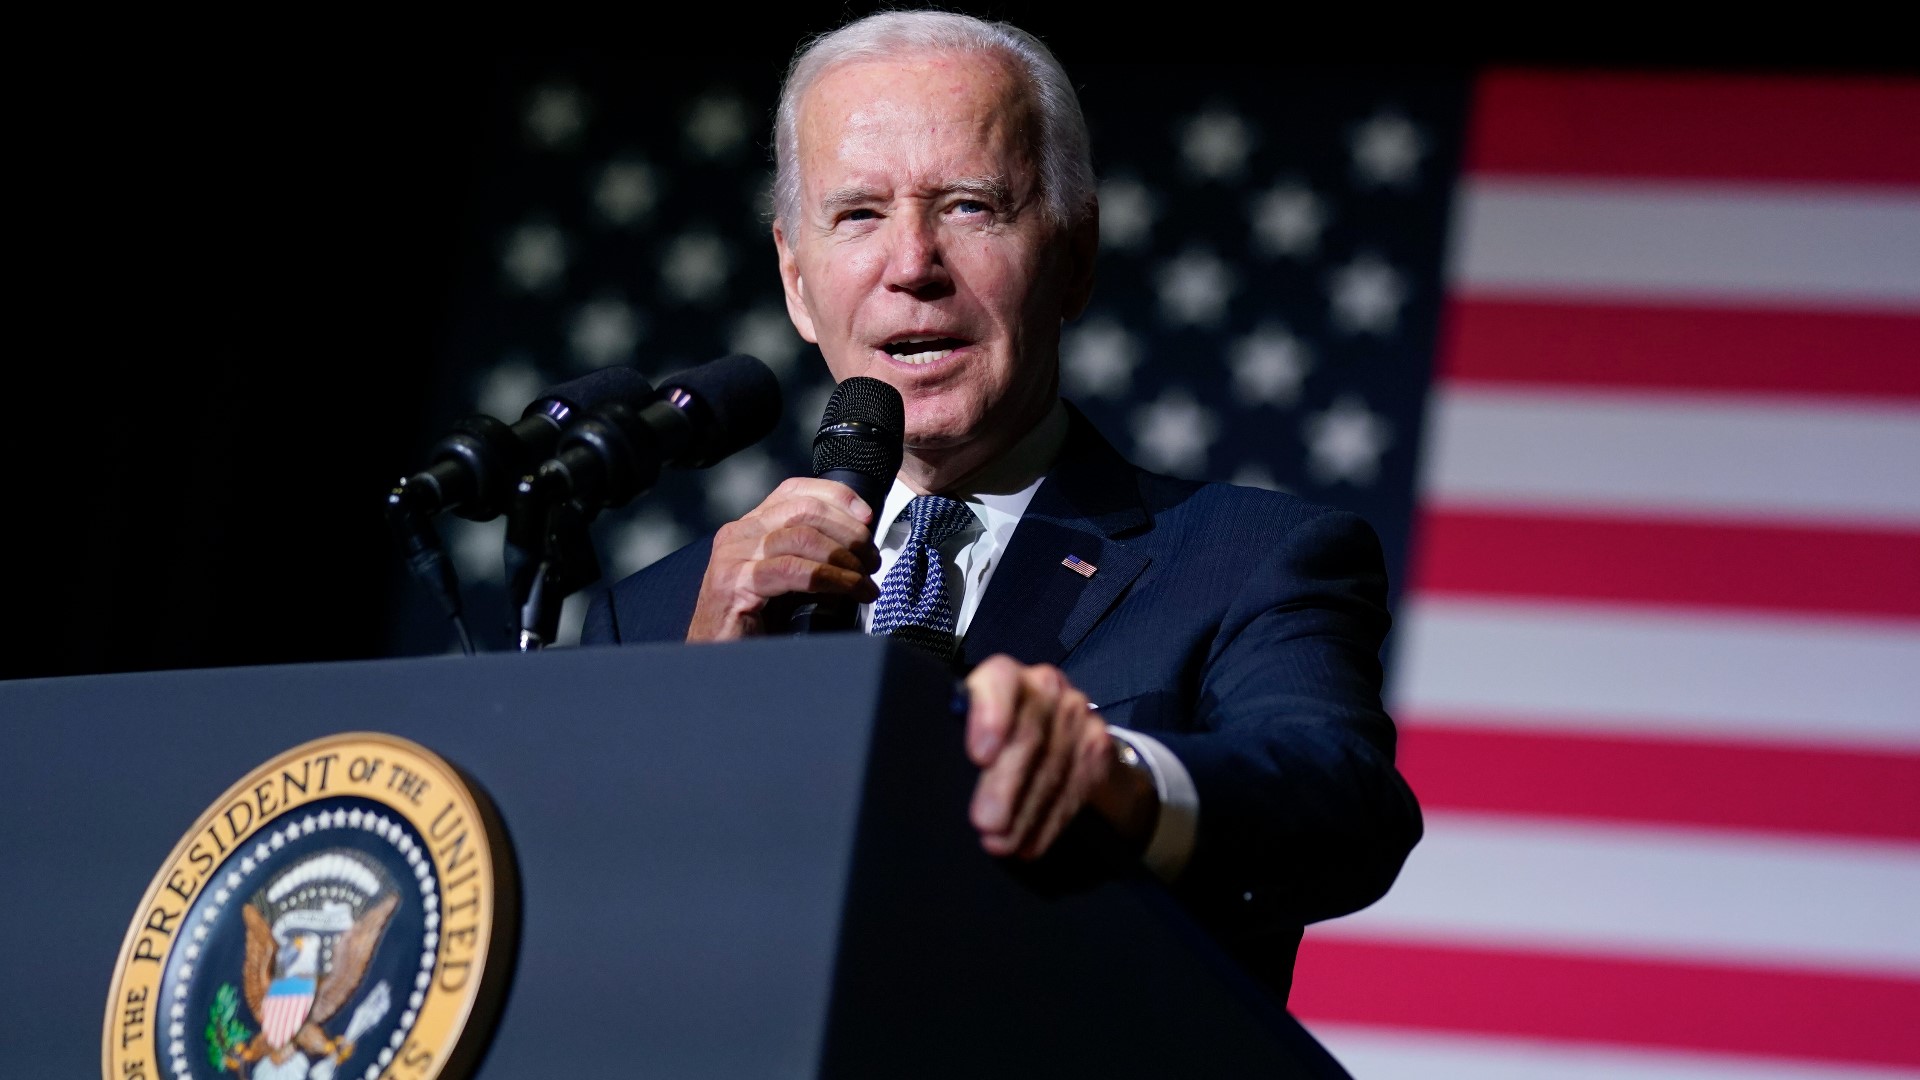 President Biden spoke Friday at Delaware State University, a historically Black university where the majority of students receive federal Pell Grants.